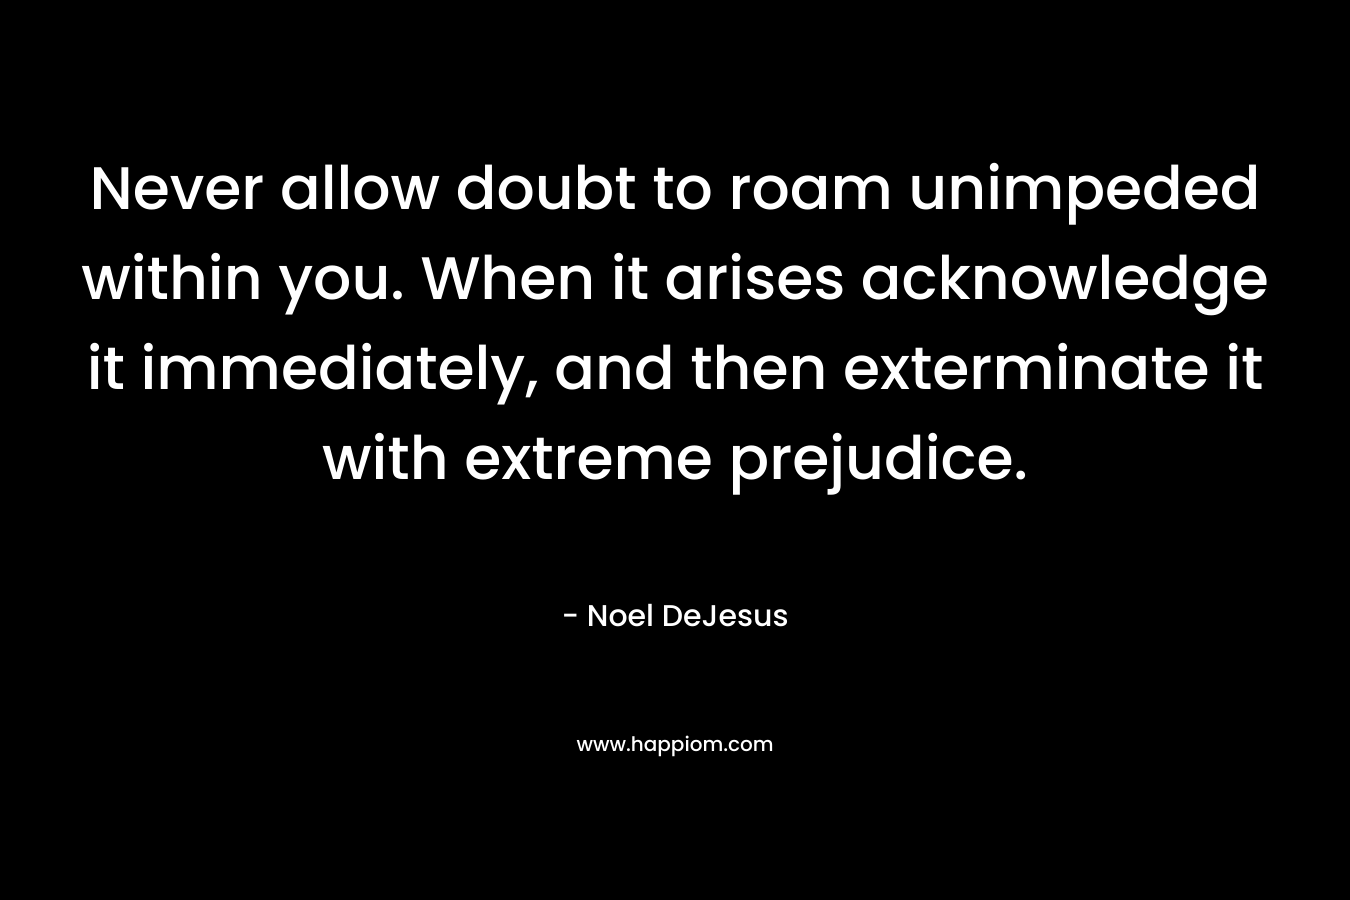 Never allow doubt to roam unimpeded within you. When it arises acknowledge it immediately, and then exterminate it with extreme prejudice.